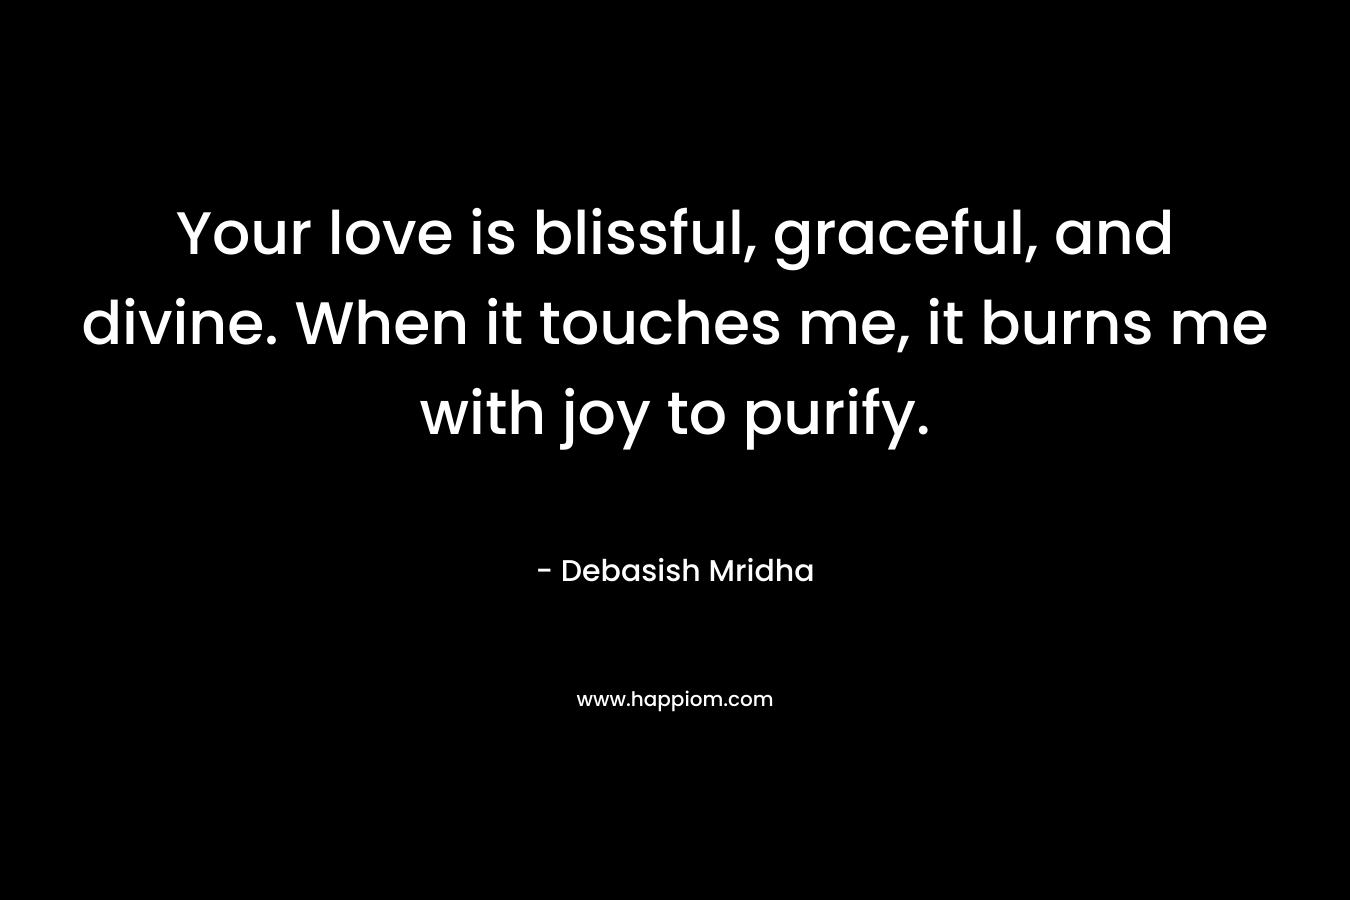 Your love is blissful, graceful, and divine. When it touches me, it burns me with joy to purify.